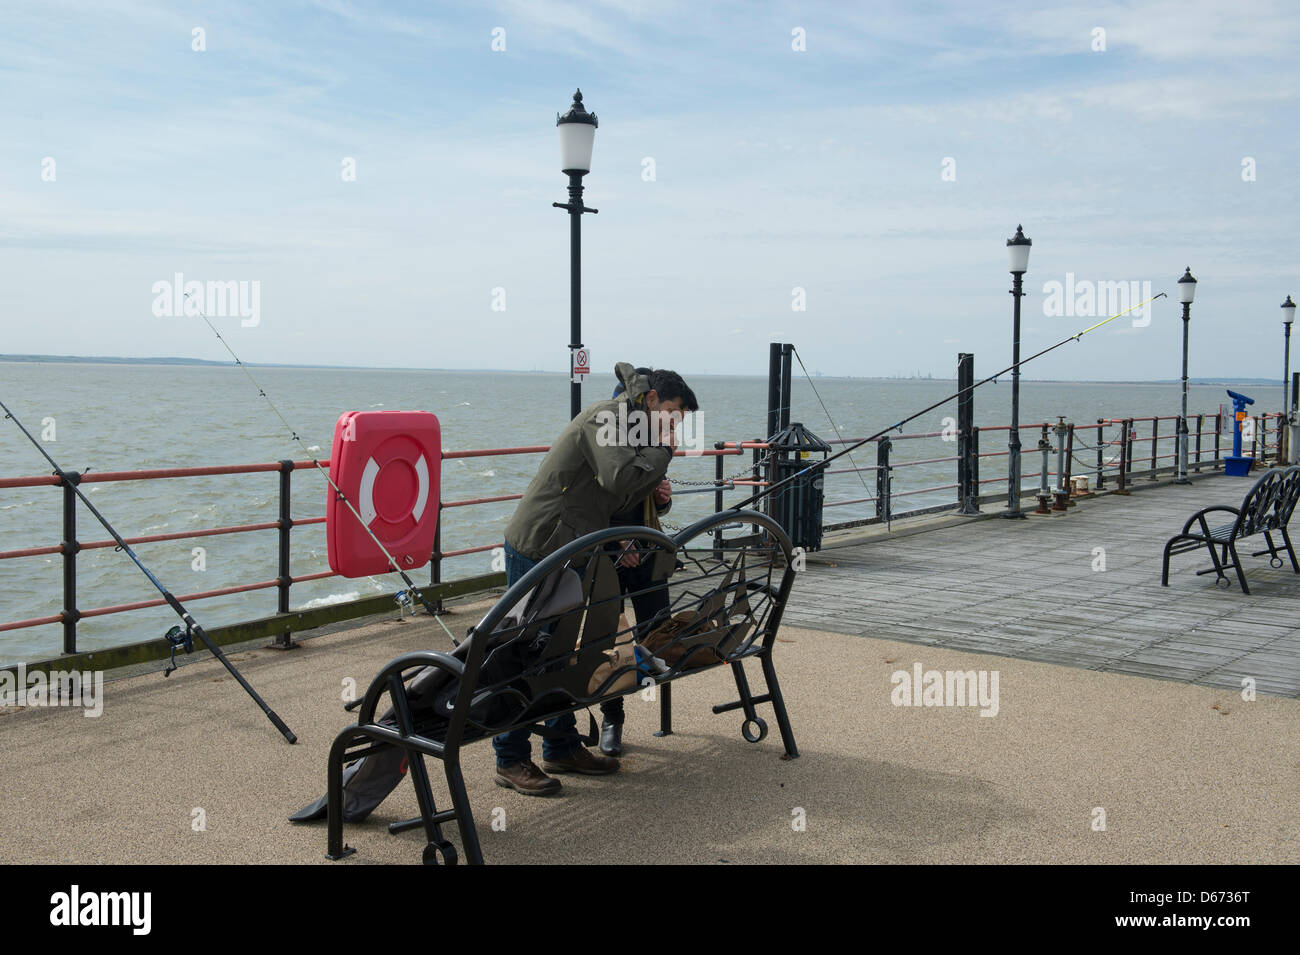 Anglers fishing at the end of Southend Pier, Essex, UK. It is the world's longest pleasure pier at 1.3 miles in length. Stock Photo